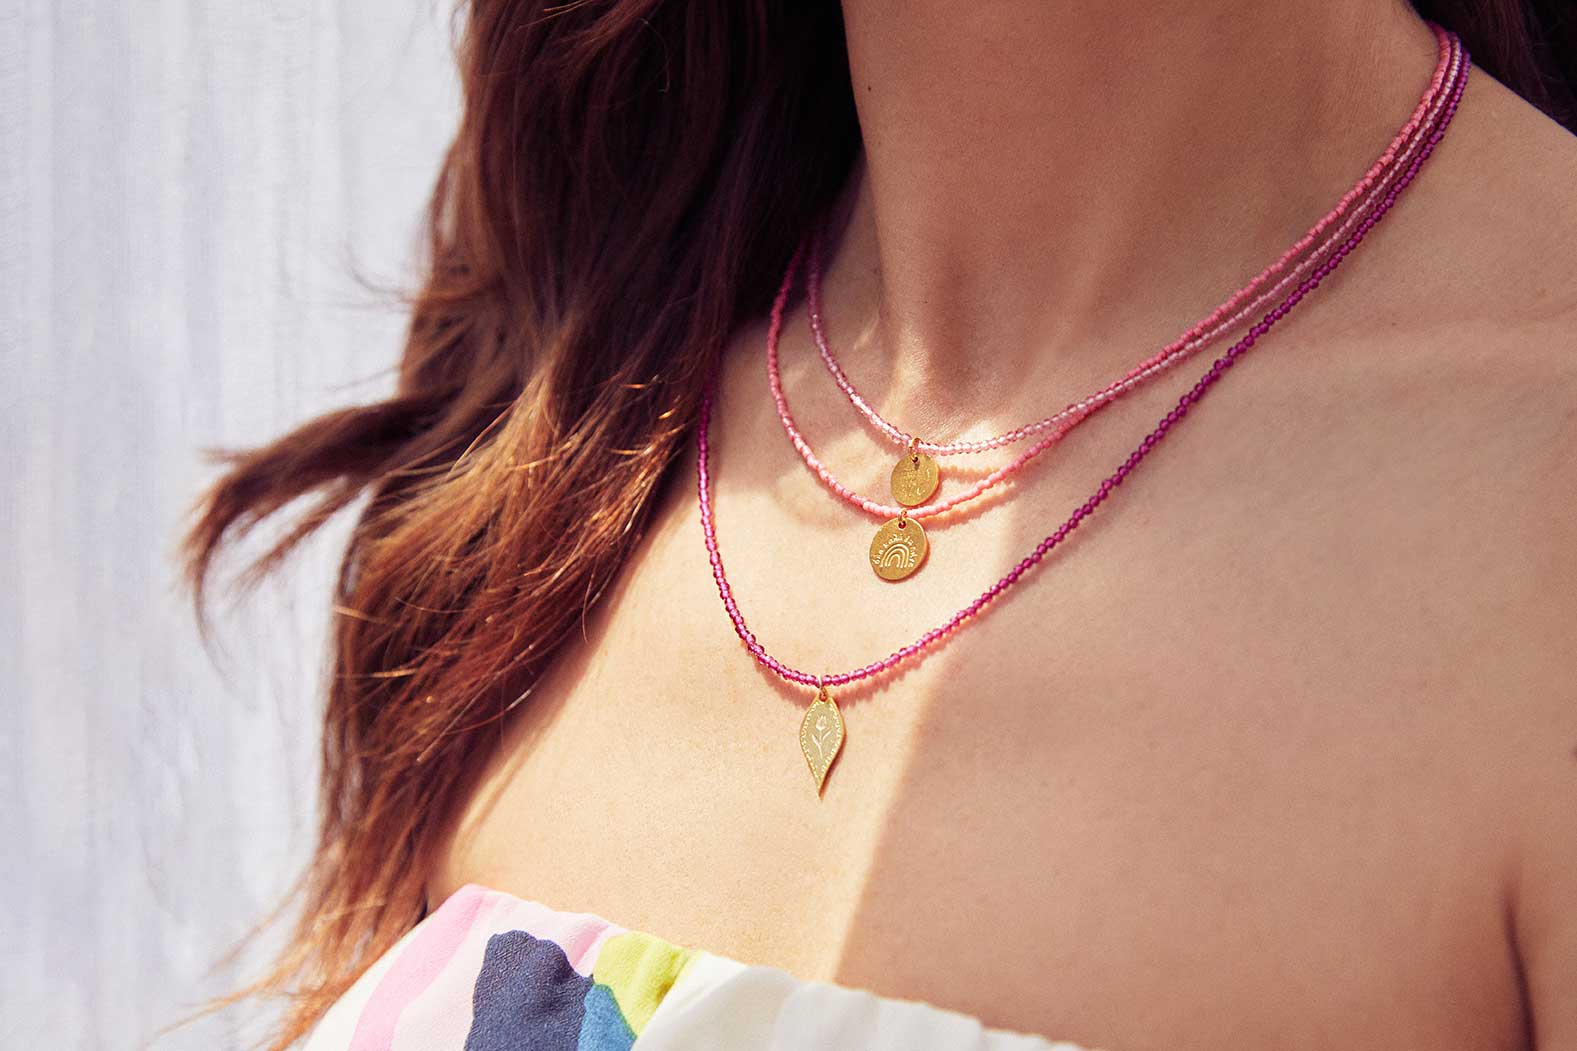 Emily Koliandri is wearing a combo in fucshia tones of 3 different necklaces with miyuki beads, semiprecious stones combined with silver 925 gold plated charms in various shapes.